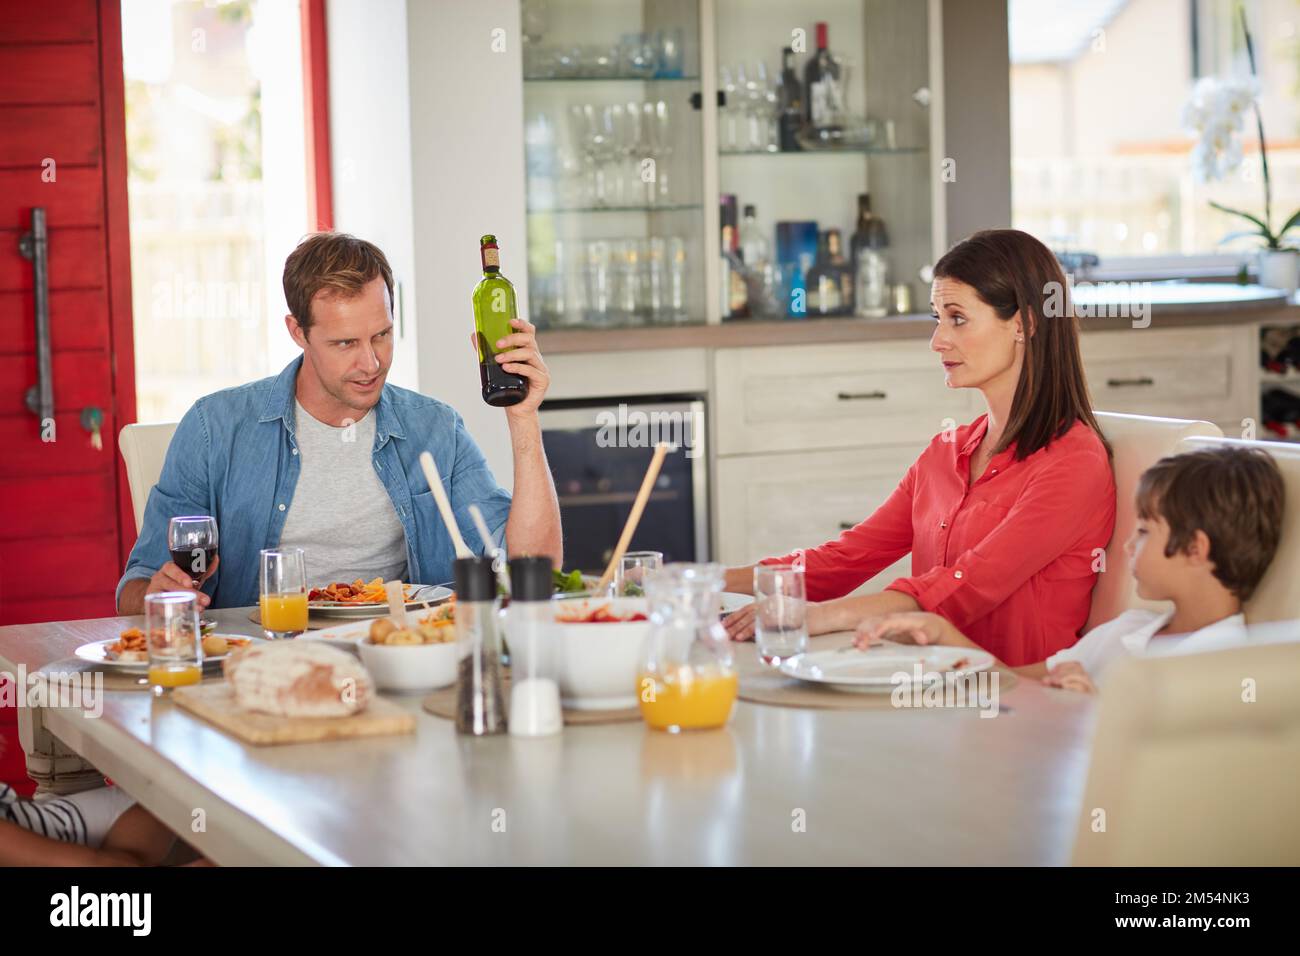 Havent you had enough wine, dear. a drunk man and his wife arguing in front of their children during lunch. Stock Photo